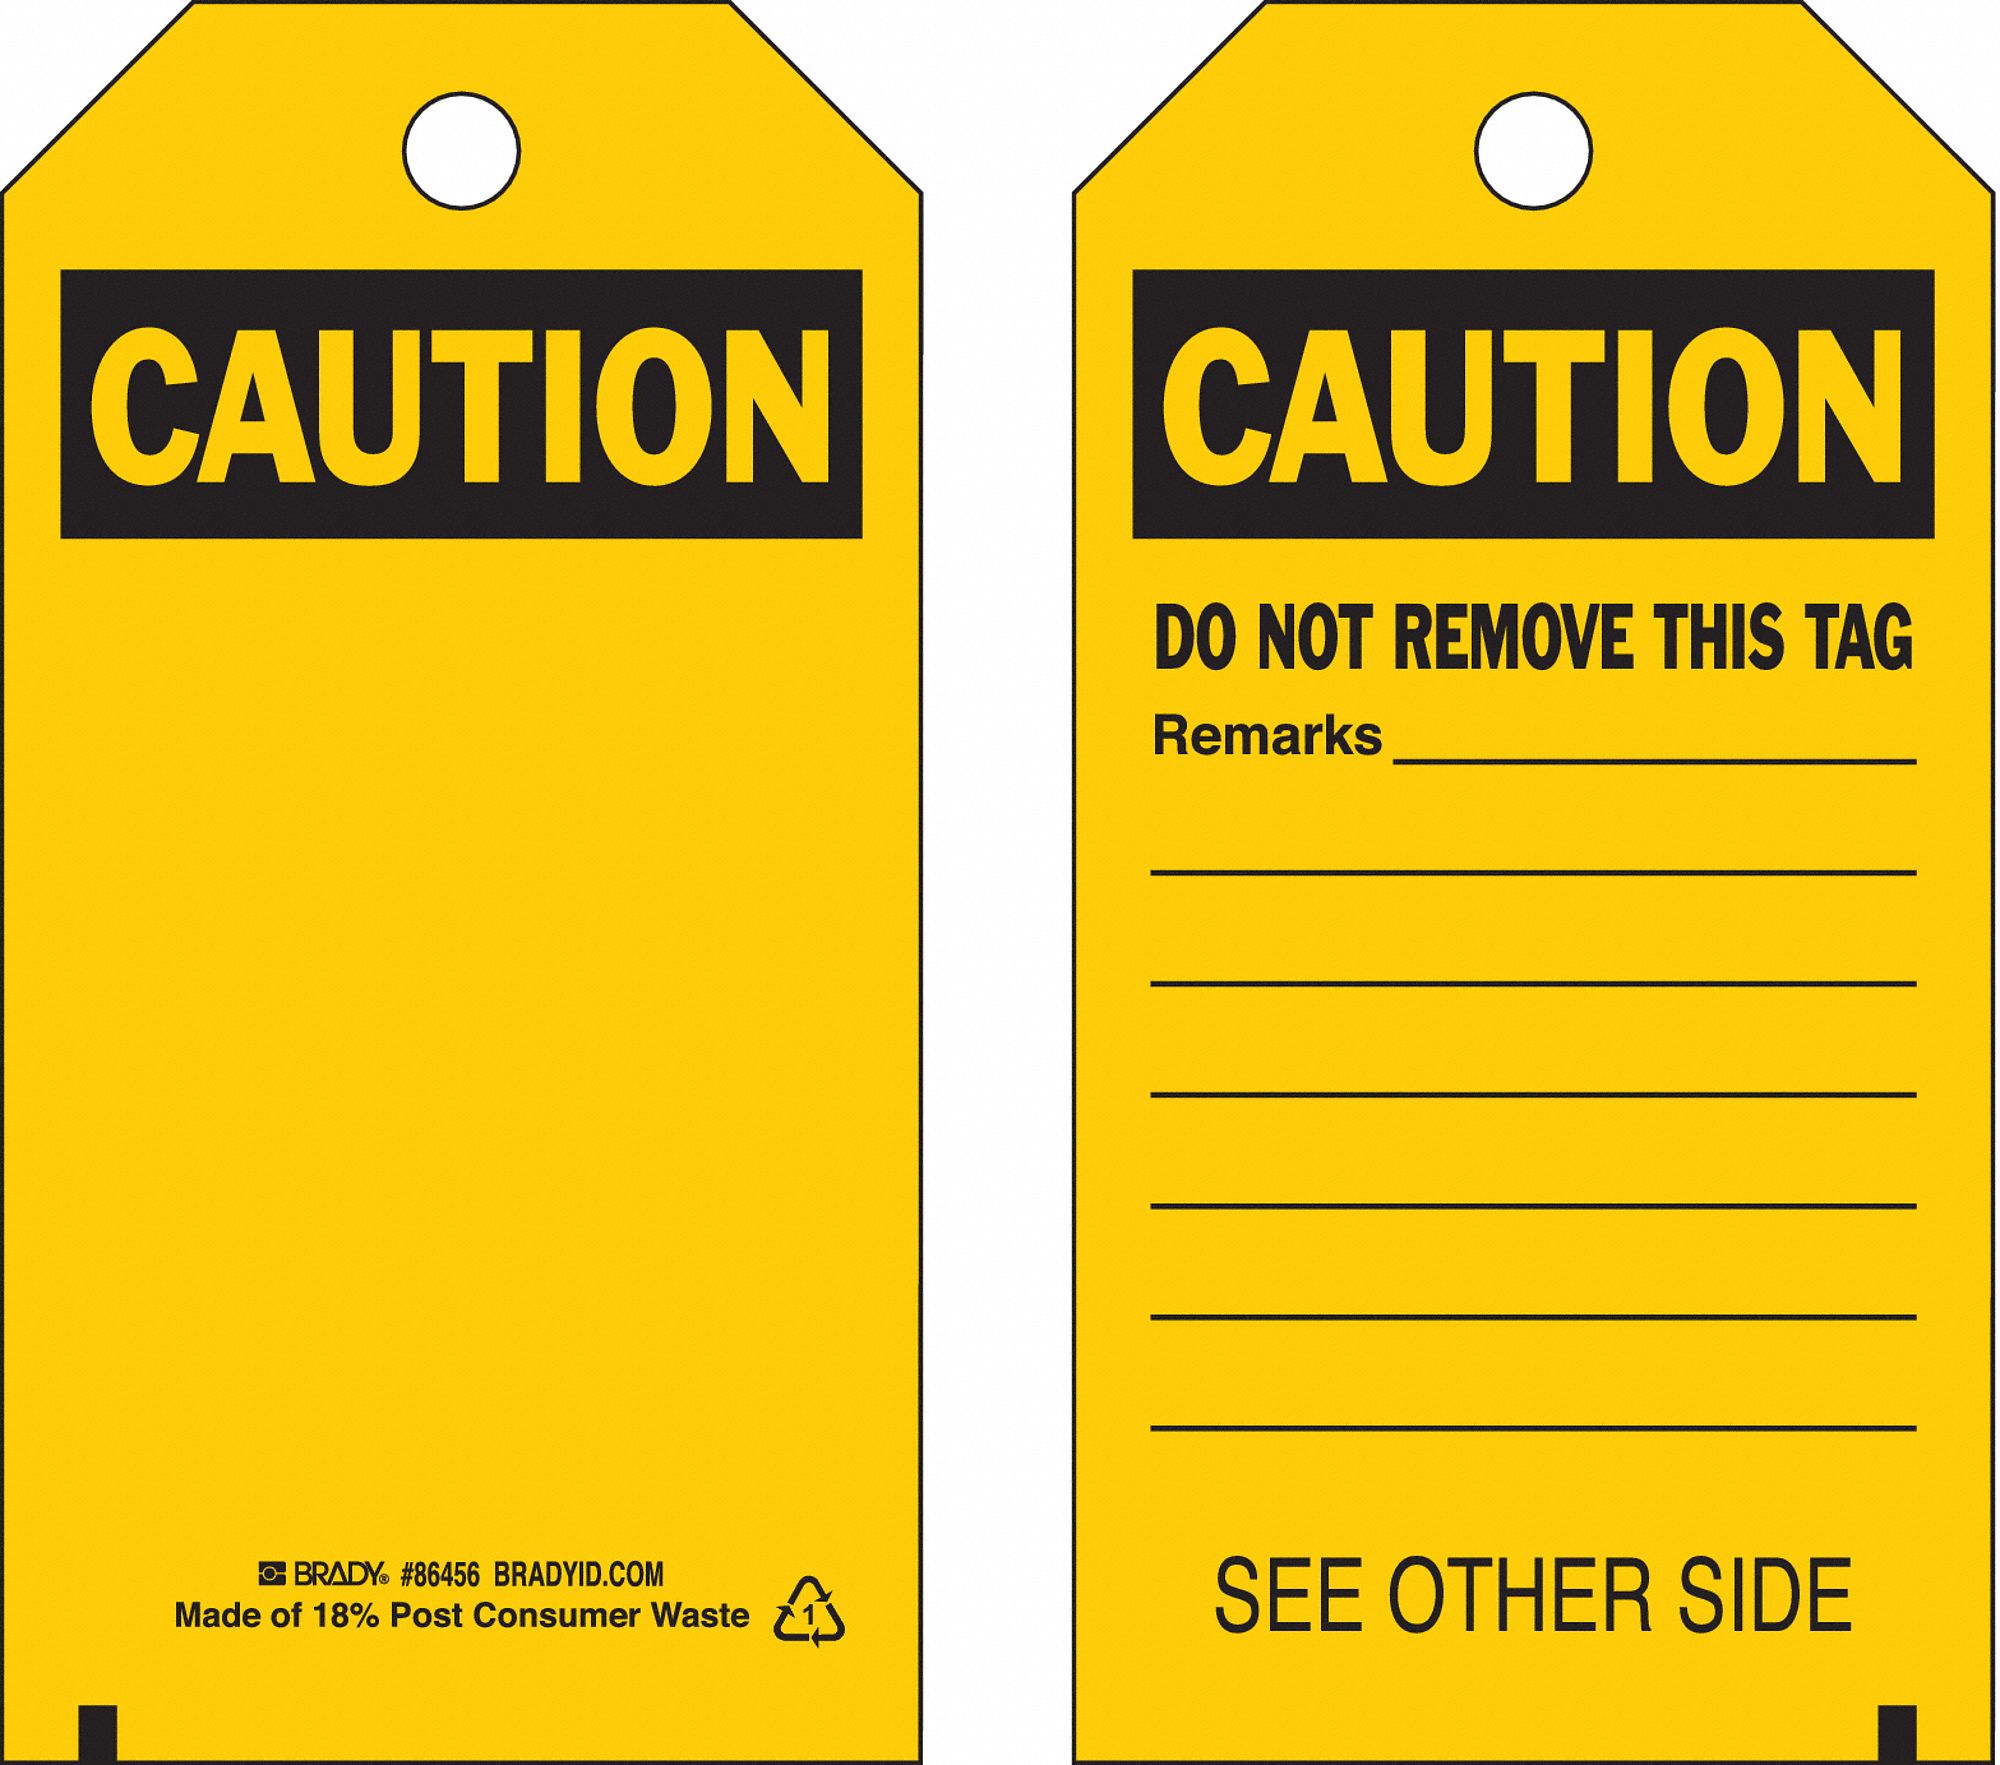 Self-Laminating PolyesterCaution (Header), Blank (Front), Blank (Back), Caution Tag 5-3/4